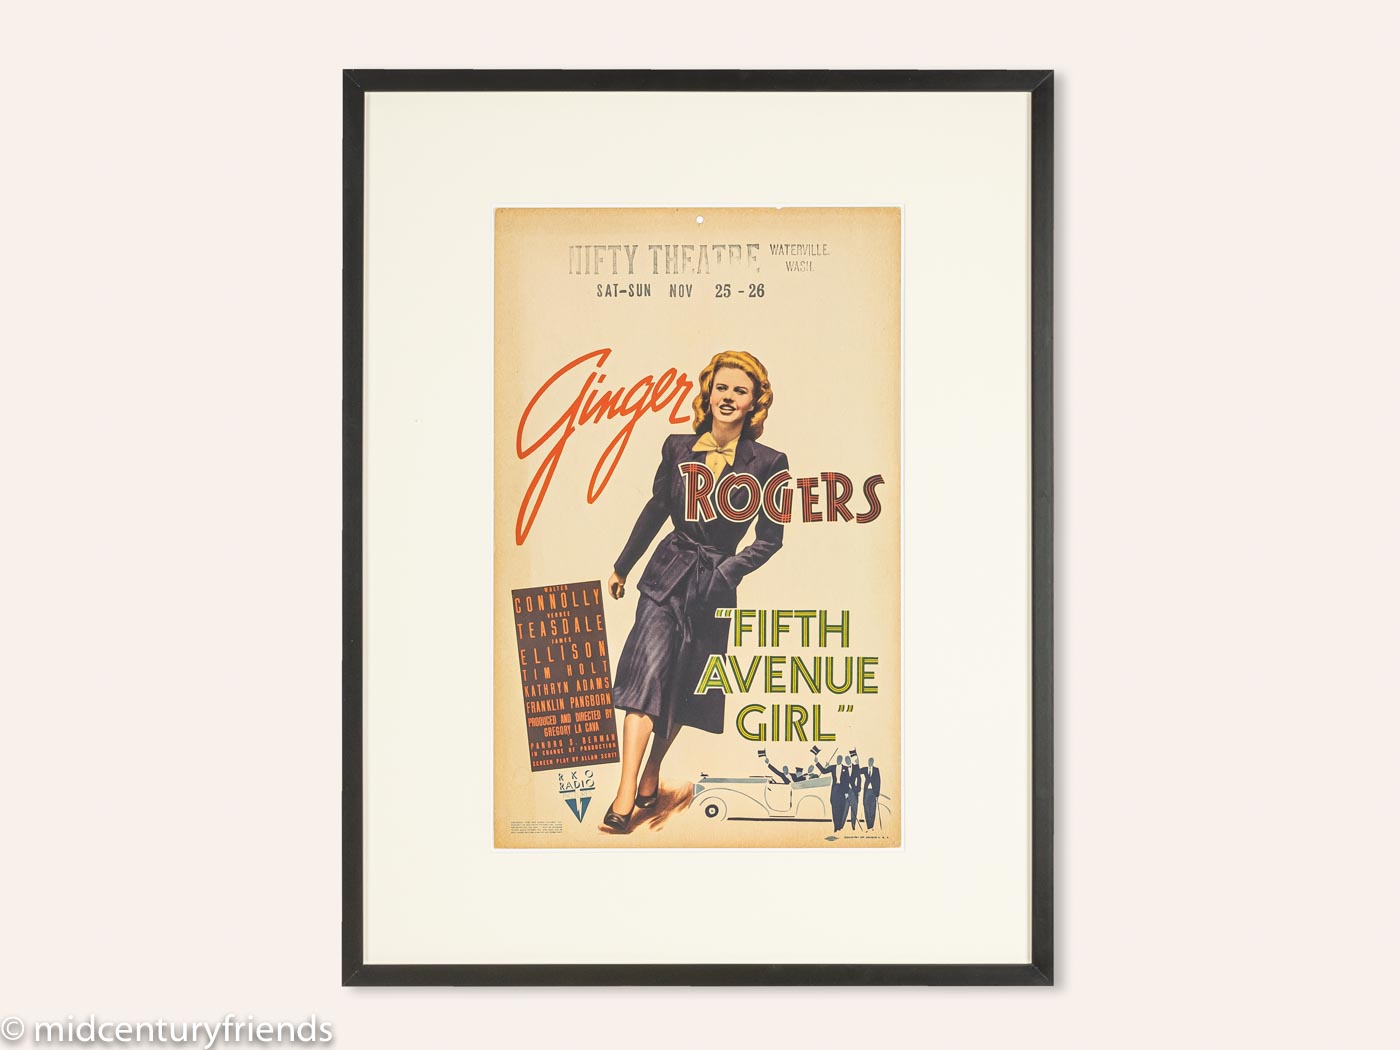 WINDOW CARD "FITH AVENUE GIRL", GINGER ROGERS